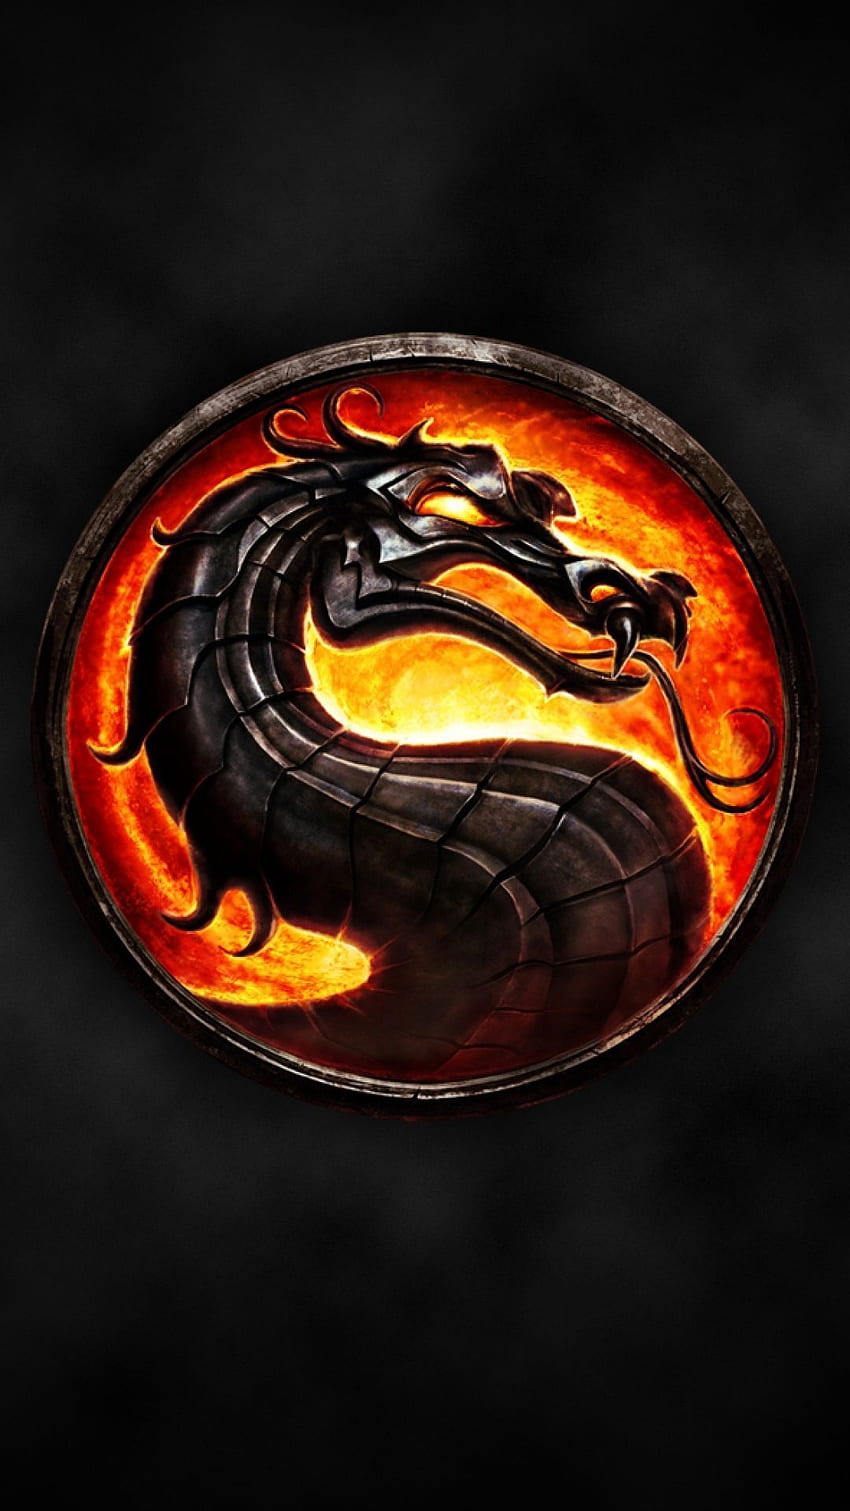 Mortal Kombat X Game: How to Download for Android, PC, iOS, Kindle